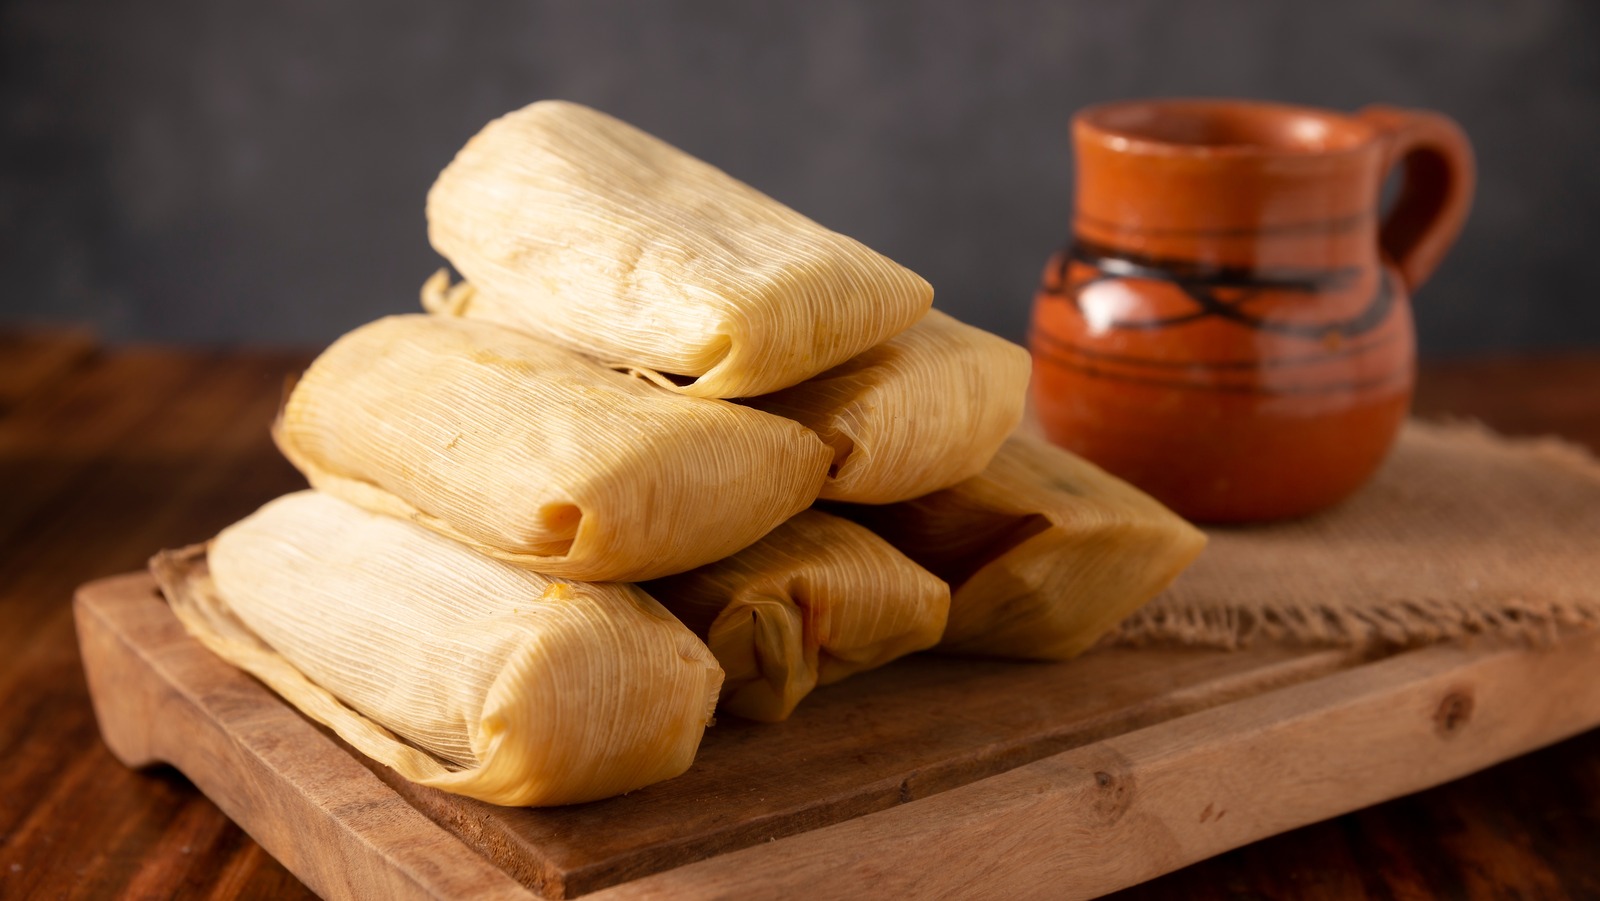 https://www.tastingtable.com/img/gallery/why-it-pays-to-use-a-masa-spreader-when-making-tamales/l-intro-1702921673.jpg